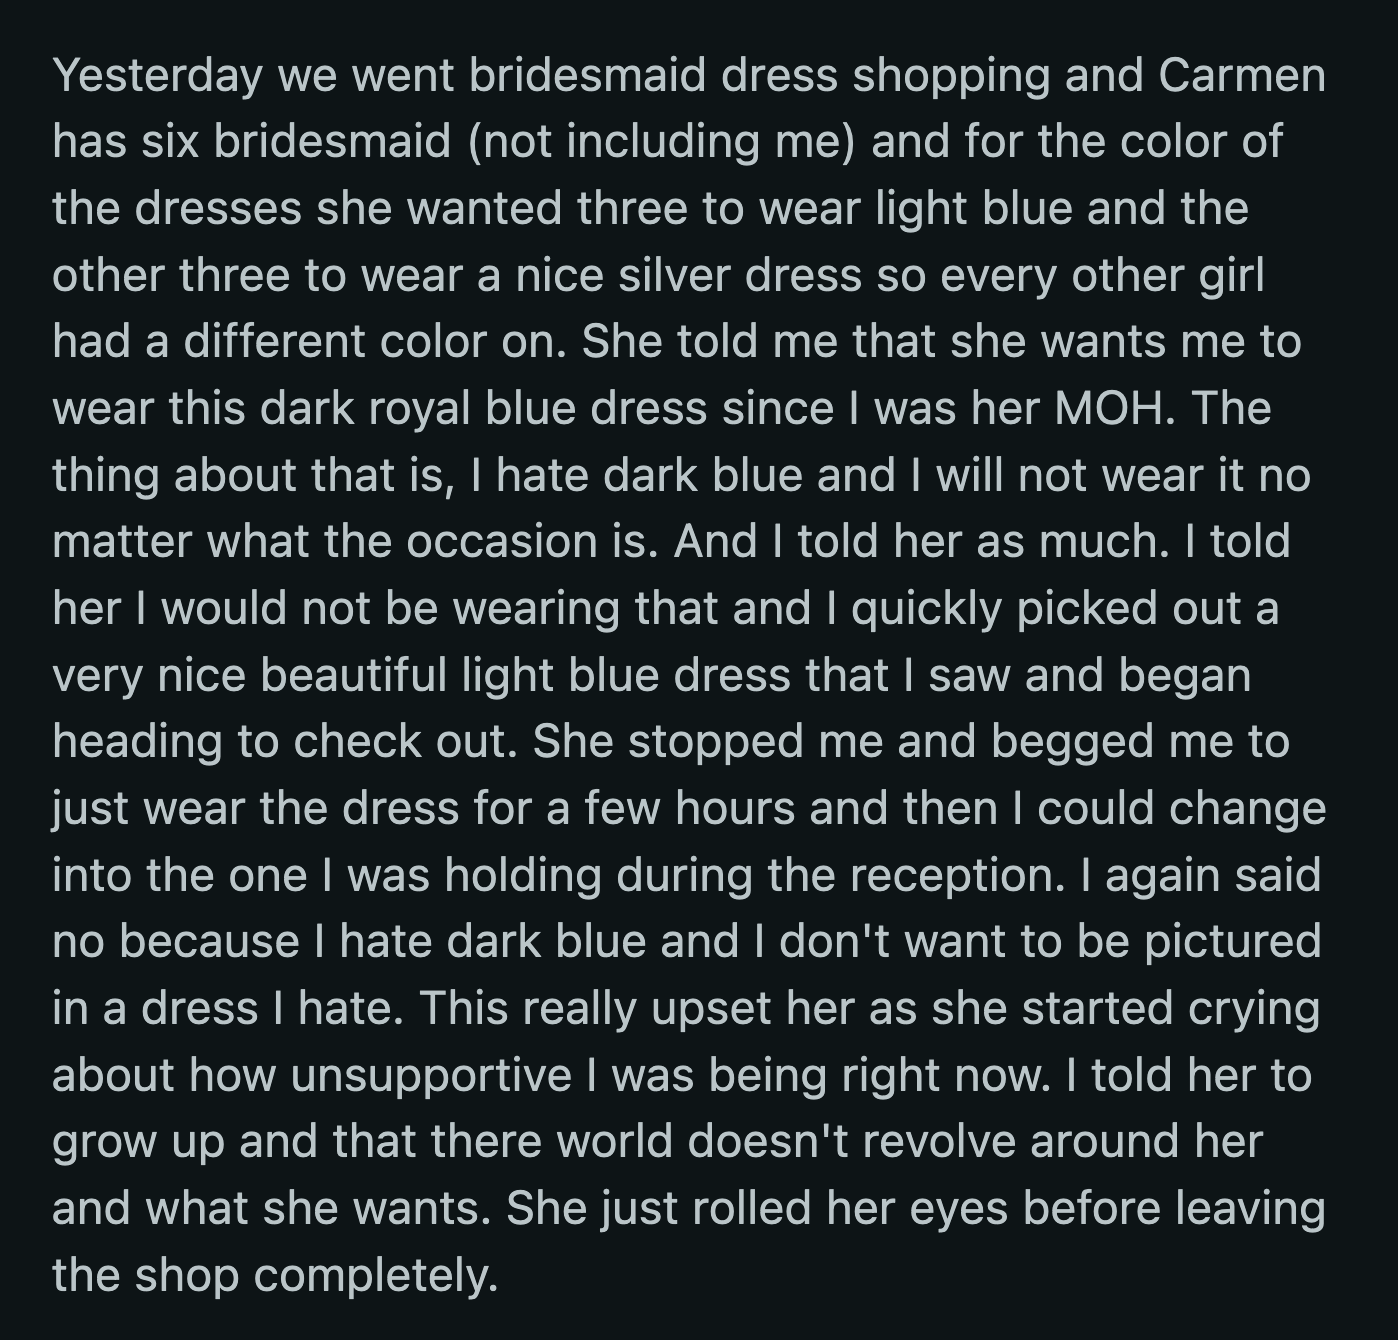 OP's husband and her best friend sided with Carmen. They said the same thing Carmen did. OP could stand to wear a dress she didn't like for a few hours and then change into the color she wanted.